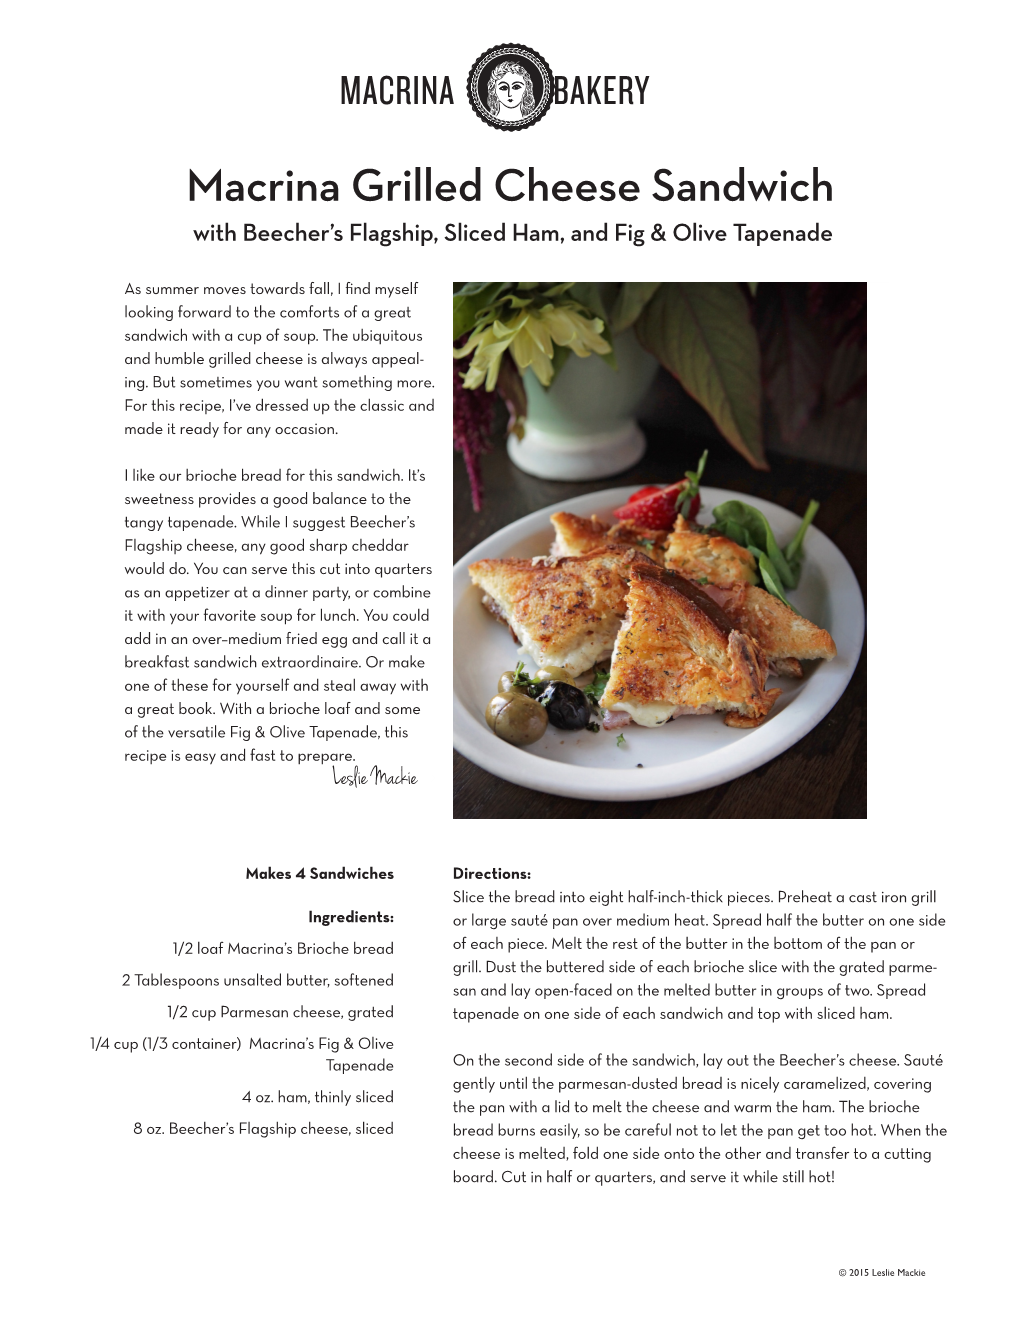 Macrina Grilled Cheese Sandwich with Beecher’S Flagship, Sliced Ham, and Fig & Olive Tapenade